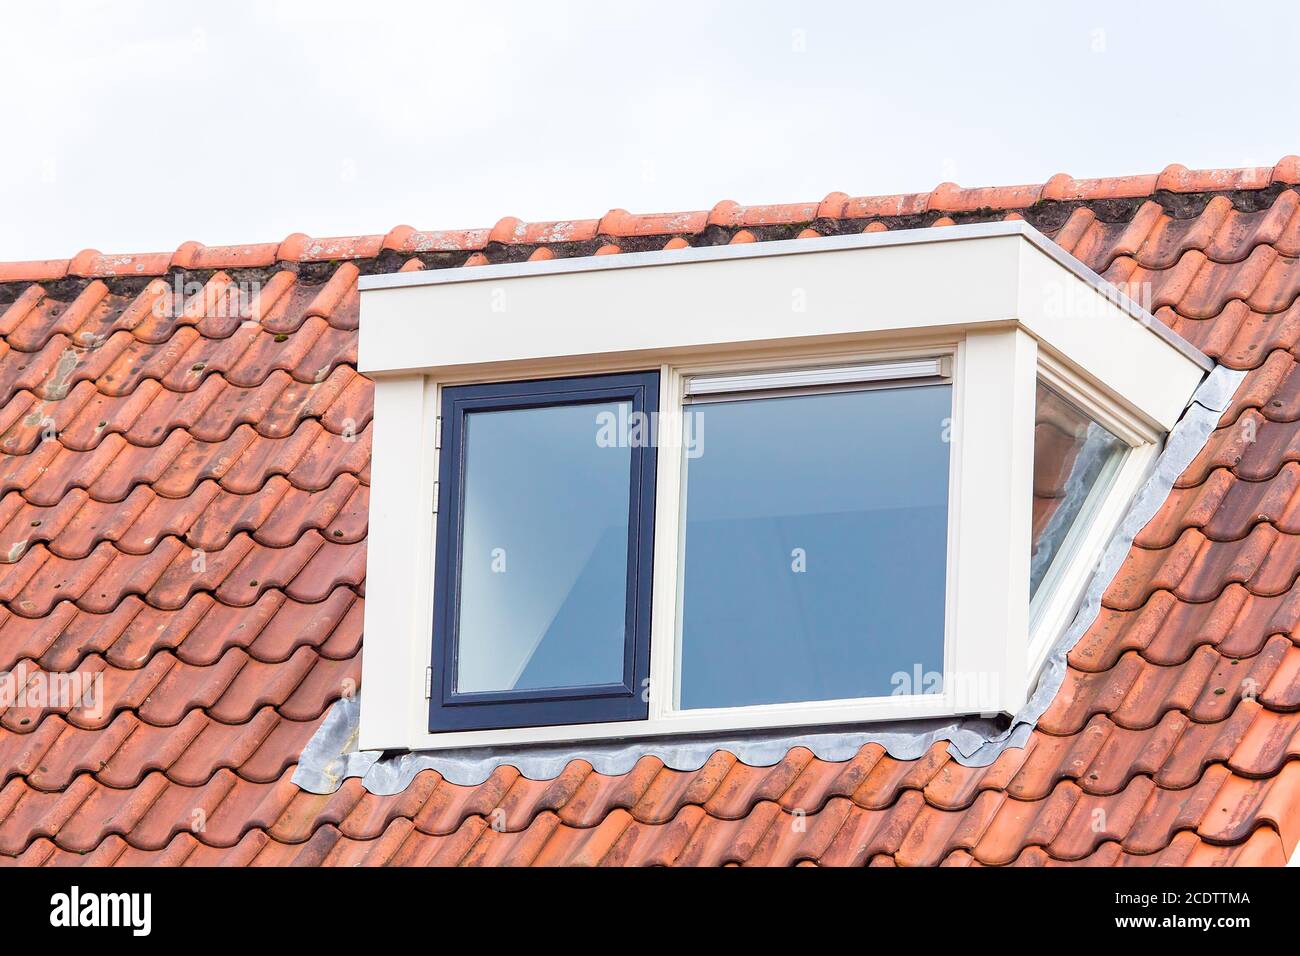 Dormer window on  roof of attic with roof tiles Stock Photo